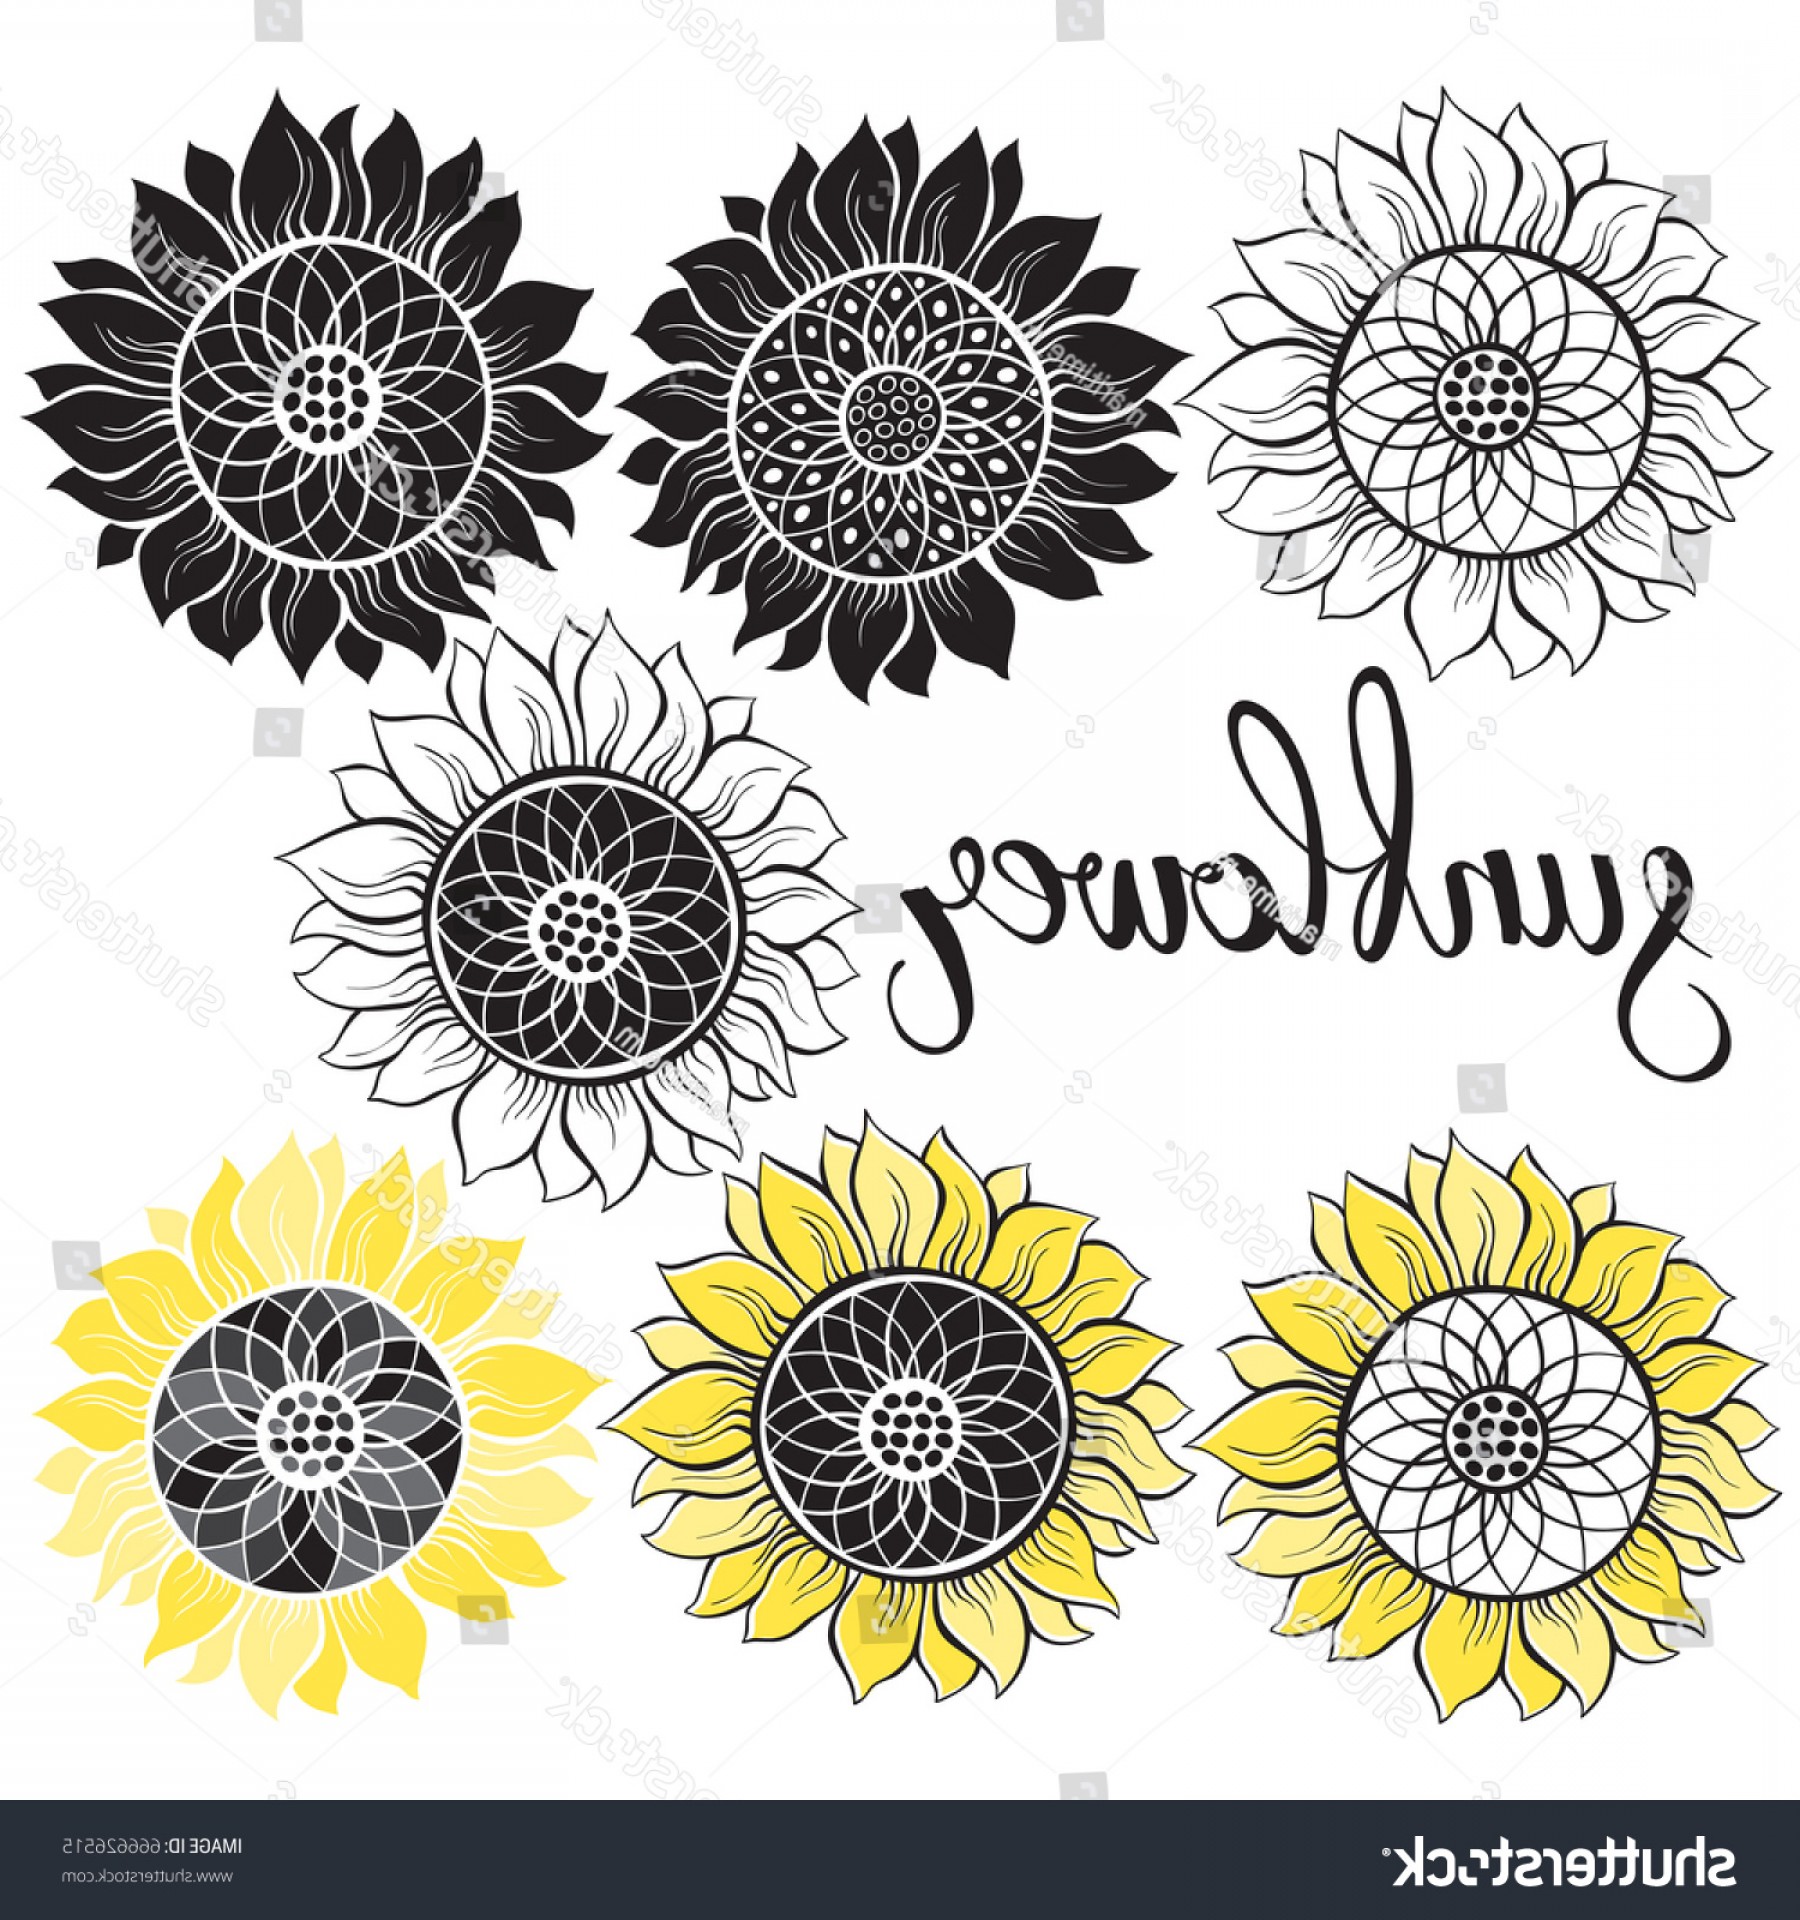 Download Sunflower Vector Black And White at Vectorified.com ...